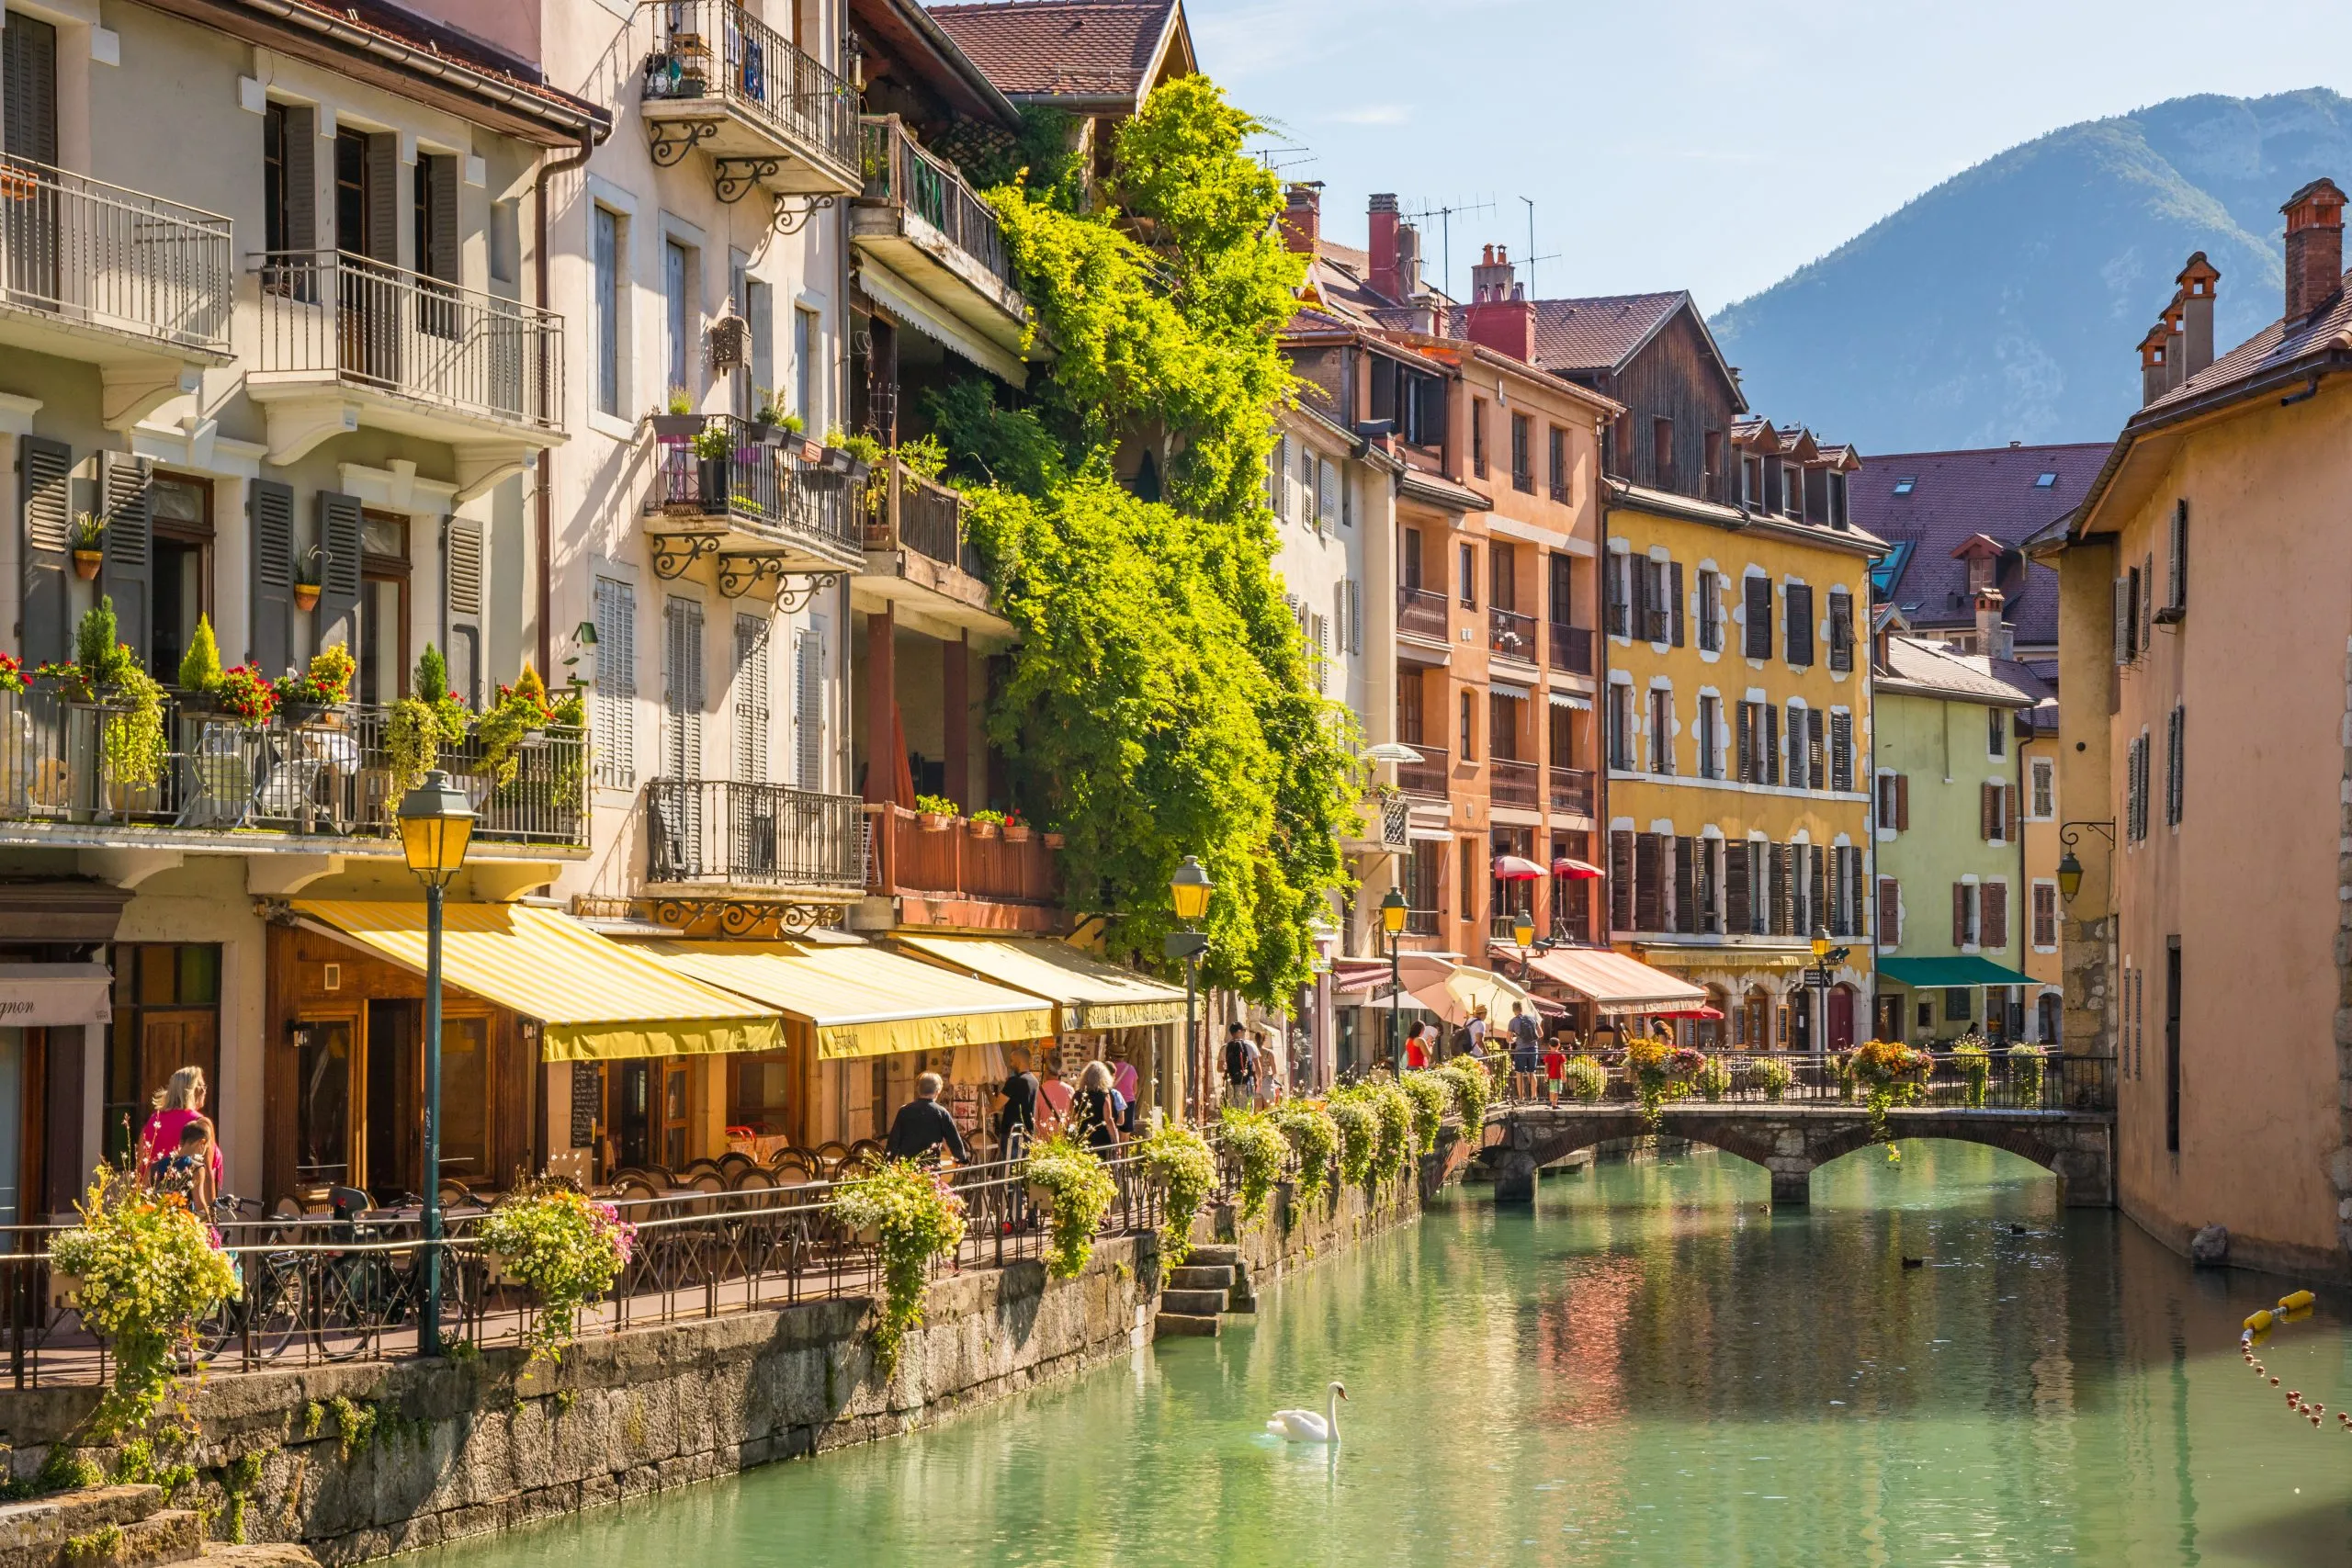 Old city of Annecy and the river Thiou in Haute-Savoie, France on a summer day